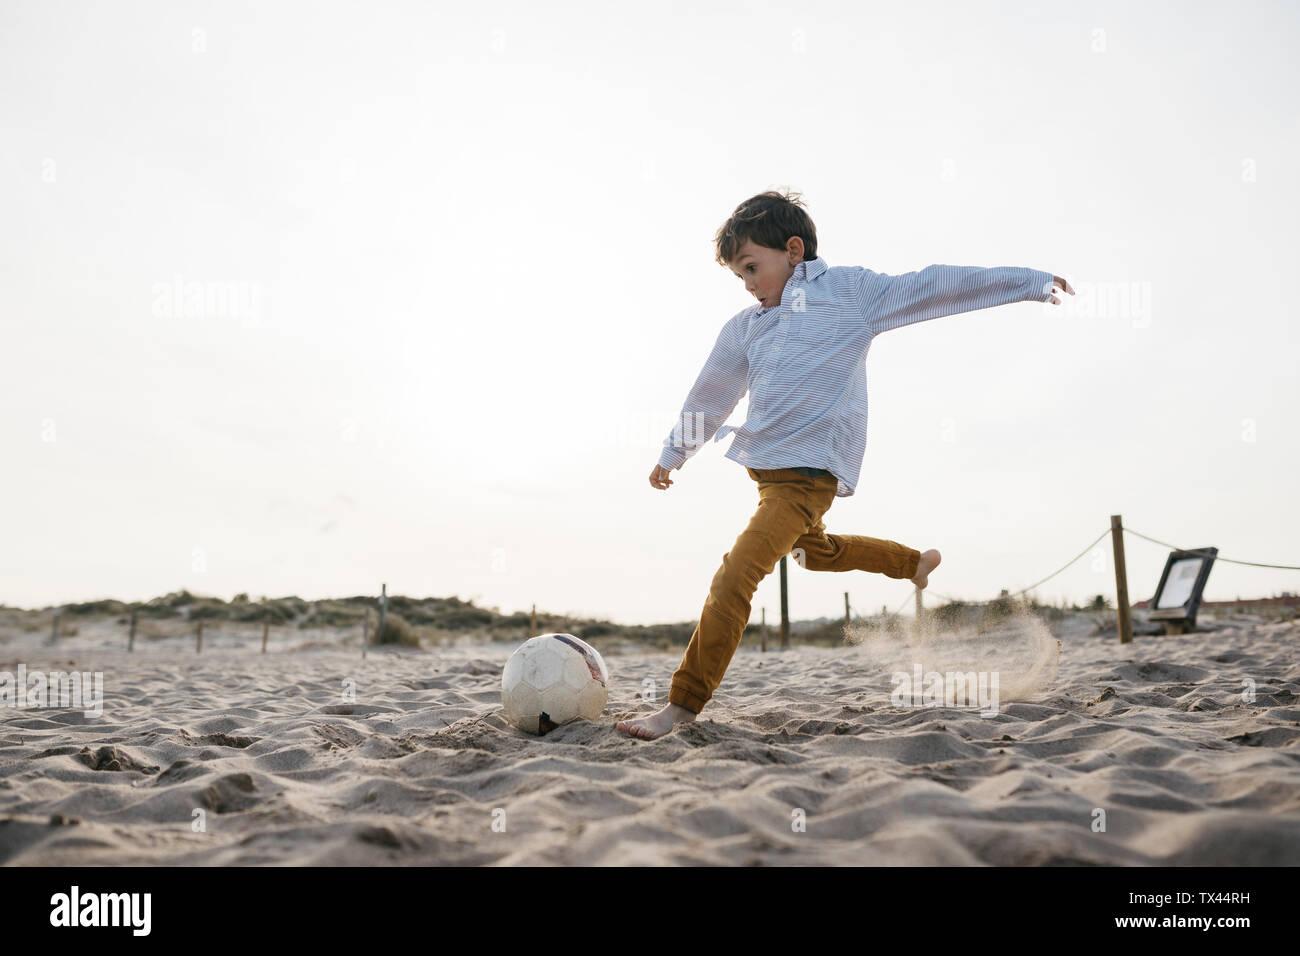 Little boy playing soccer on the beach kicking the ball Stock Photo